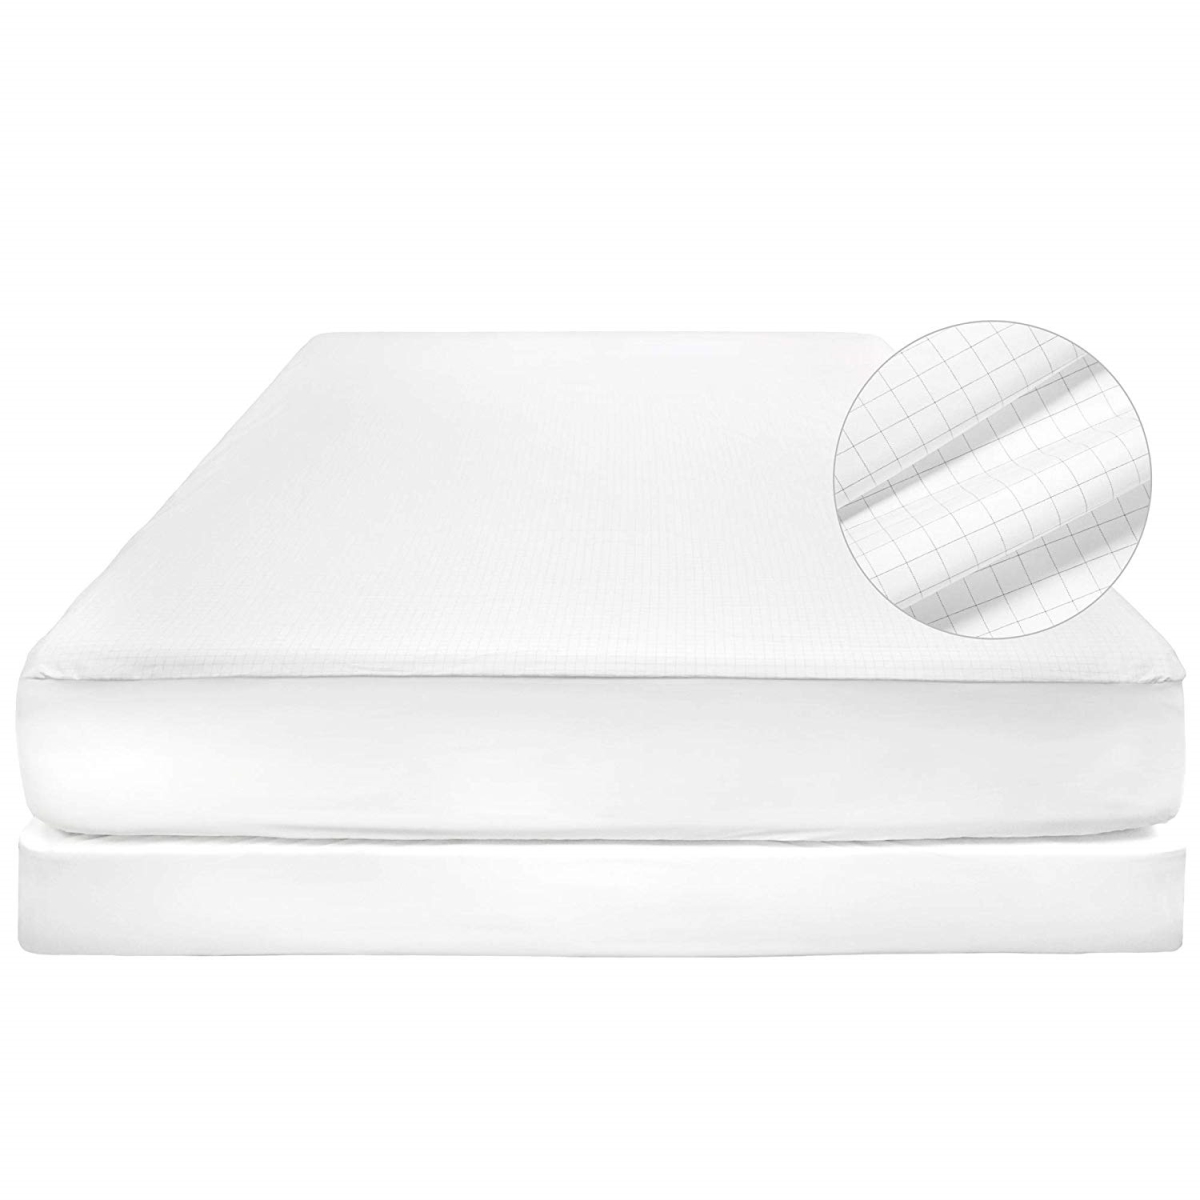 733398 Sleep Solutions By Carbon-infused Waterproof Mattress Protector, White - King Size